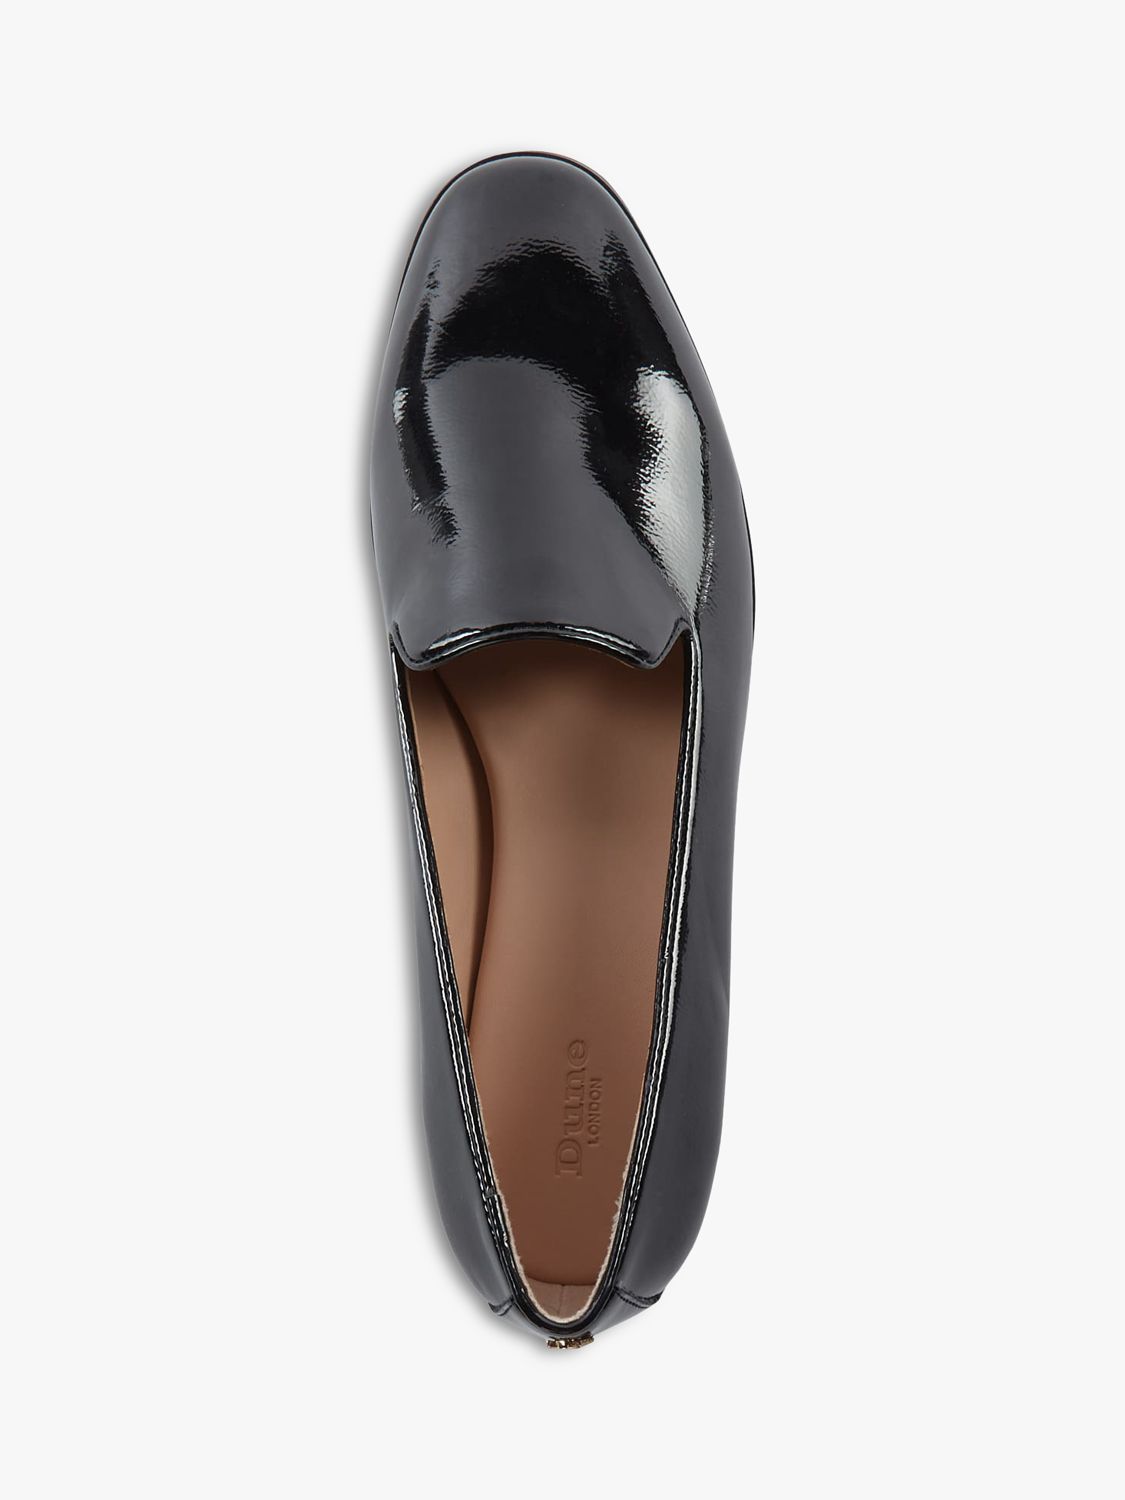 Dune Glassi Patent Loafers, Black at John Lewis & Partners